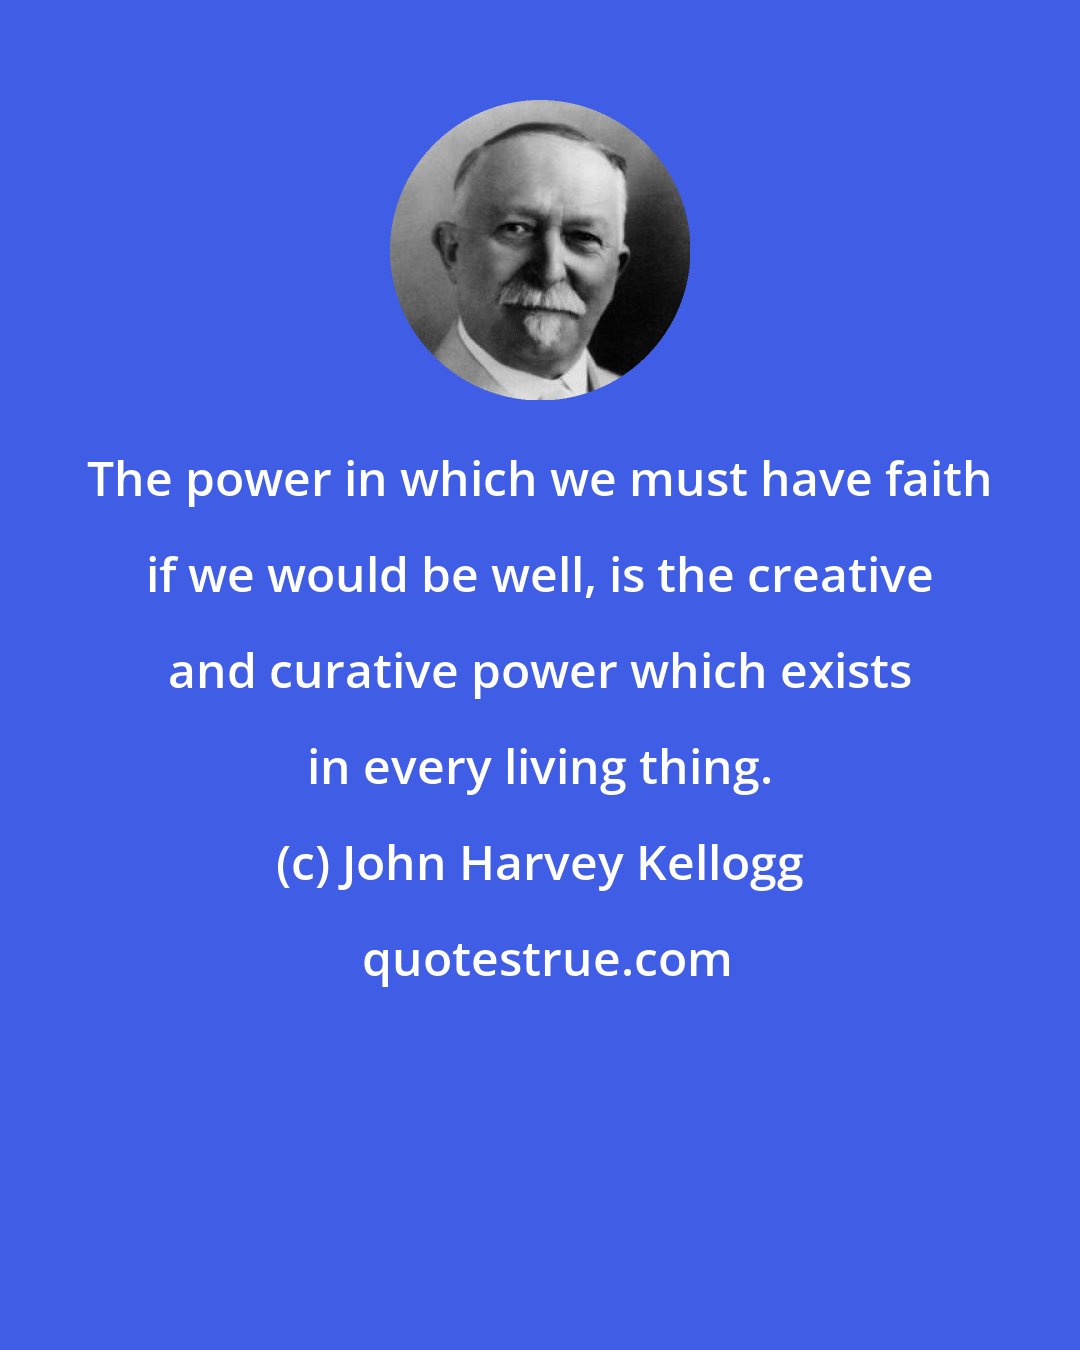 John Harvey Kellogg: The power in which we must have faith if we would be well, is the creative and curative power which exists in every living thing.